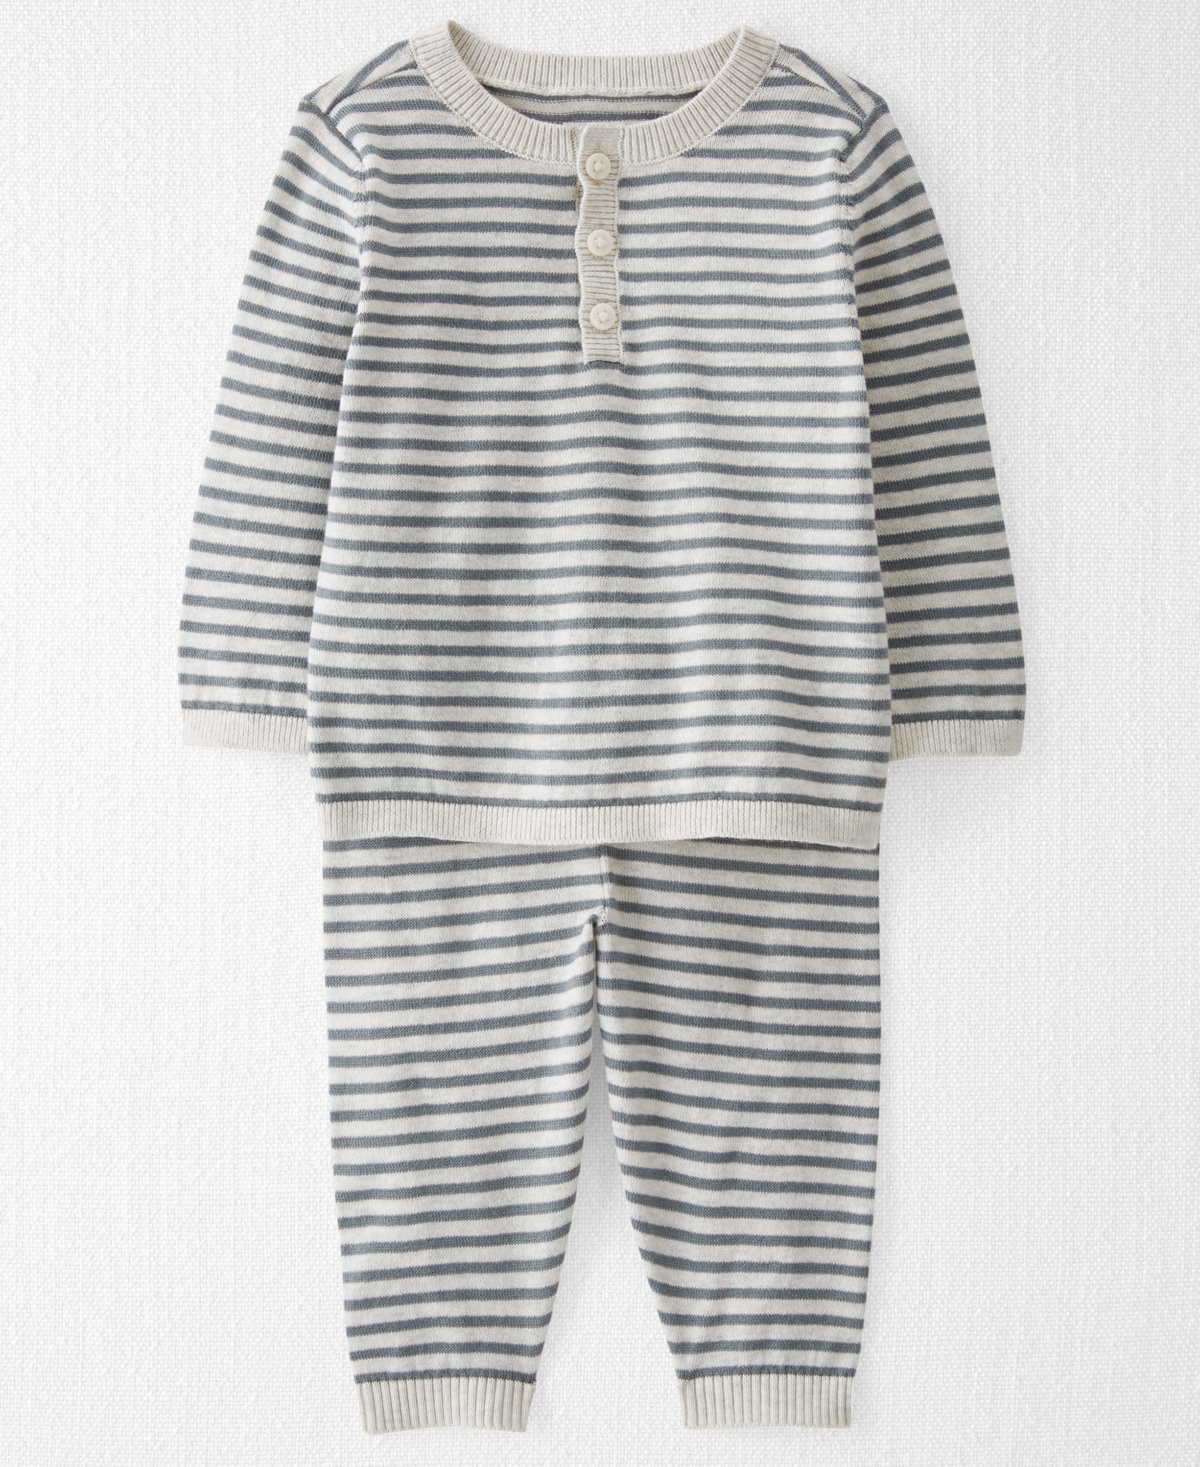 Carter's Little Planet By  Baby Boys Or Baby Girls 2-pc. Striped Organic Cotton Sweater Knit Top & Bo In Grey Heather